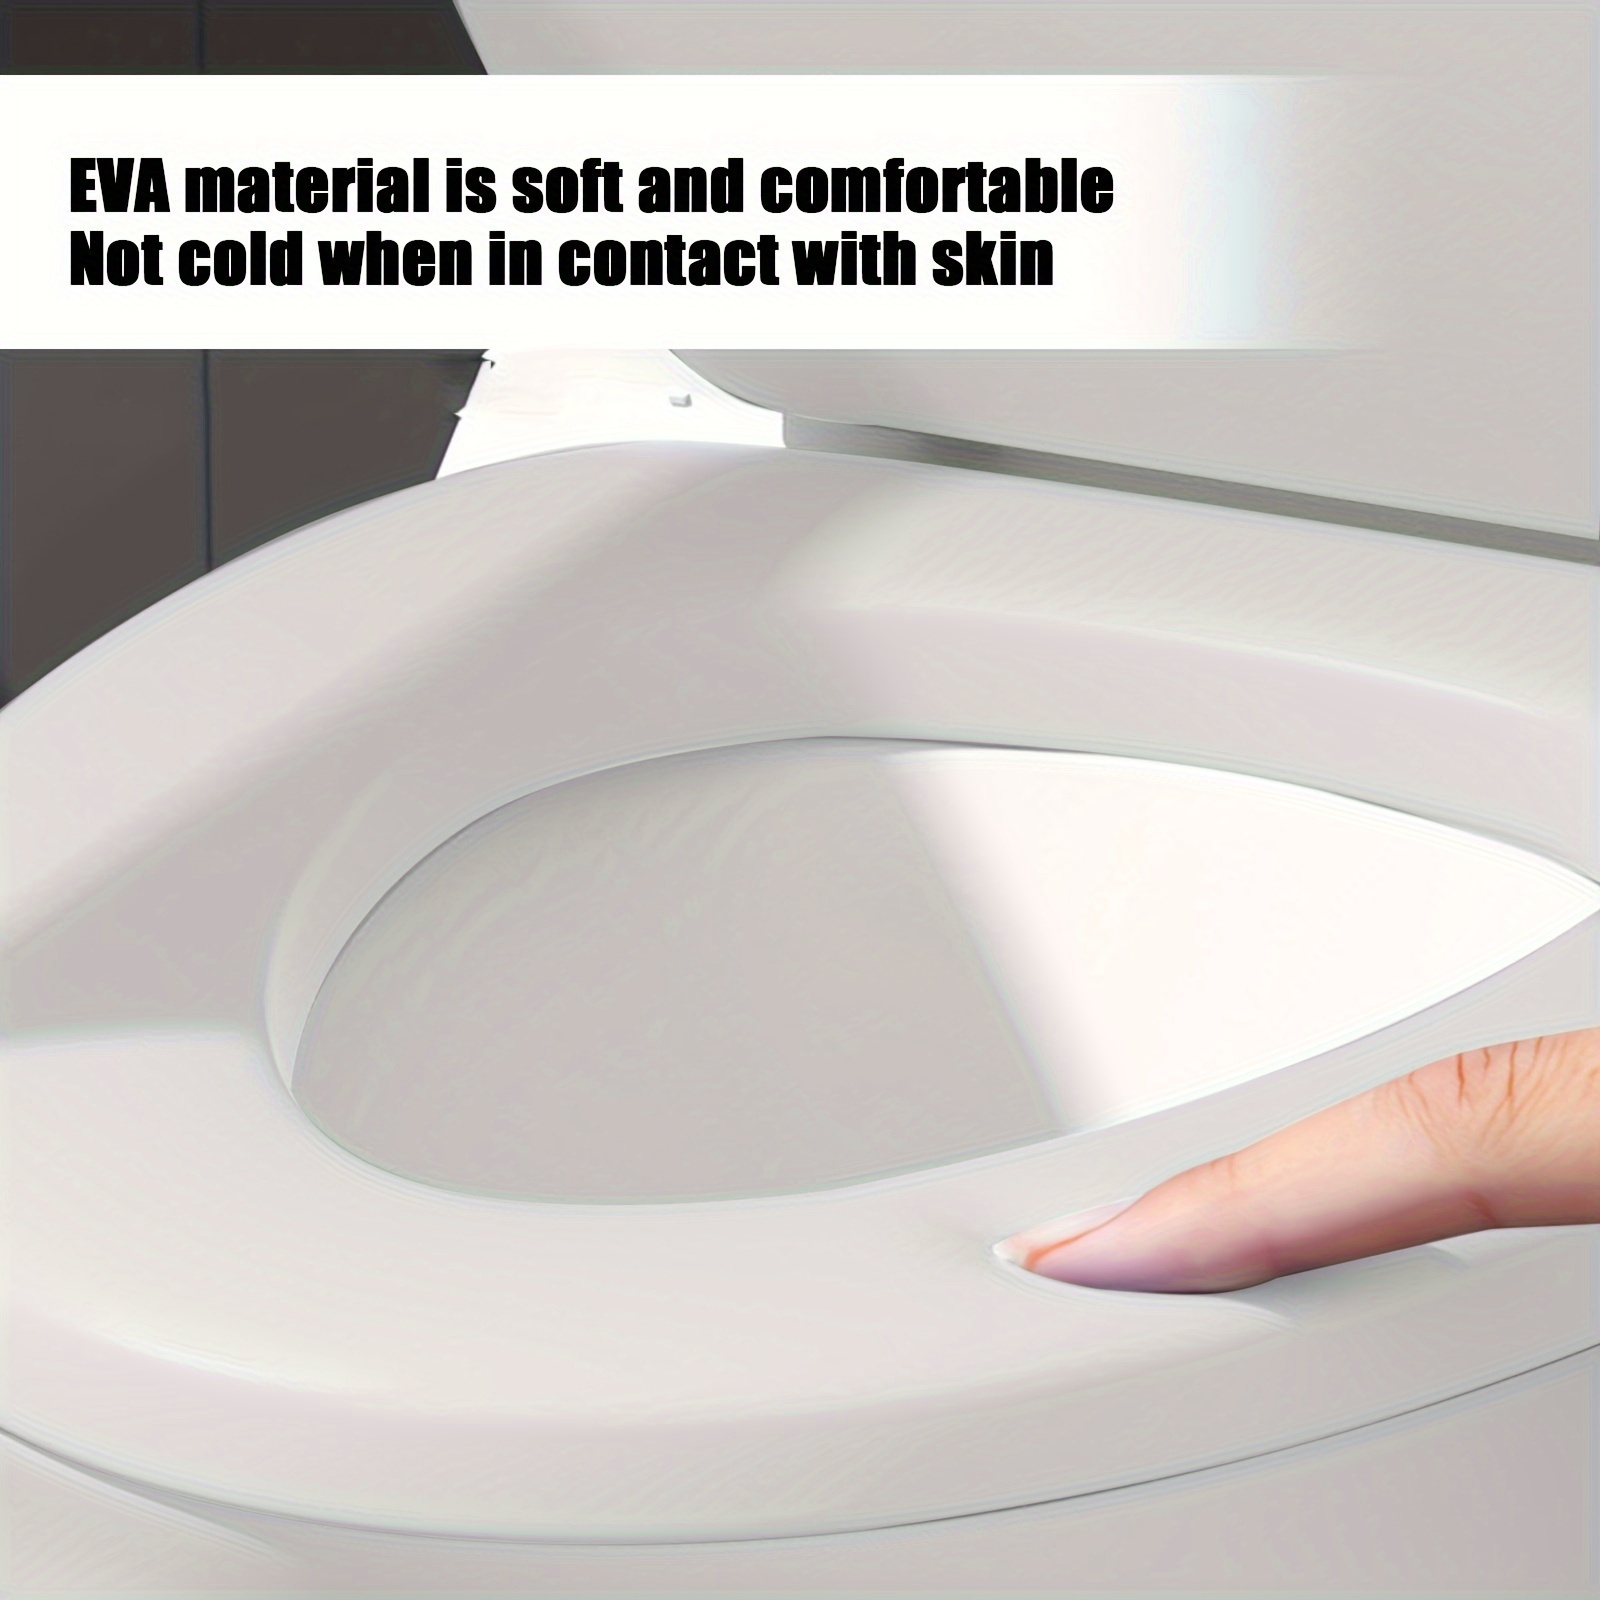 

Soft Elongated Vinyl Toilet Seat Soft Vinyl Cover With Comfort Foam Cushioning - Fits All Standard Size Fixtures - Easy To Install